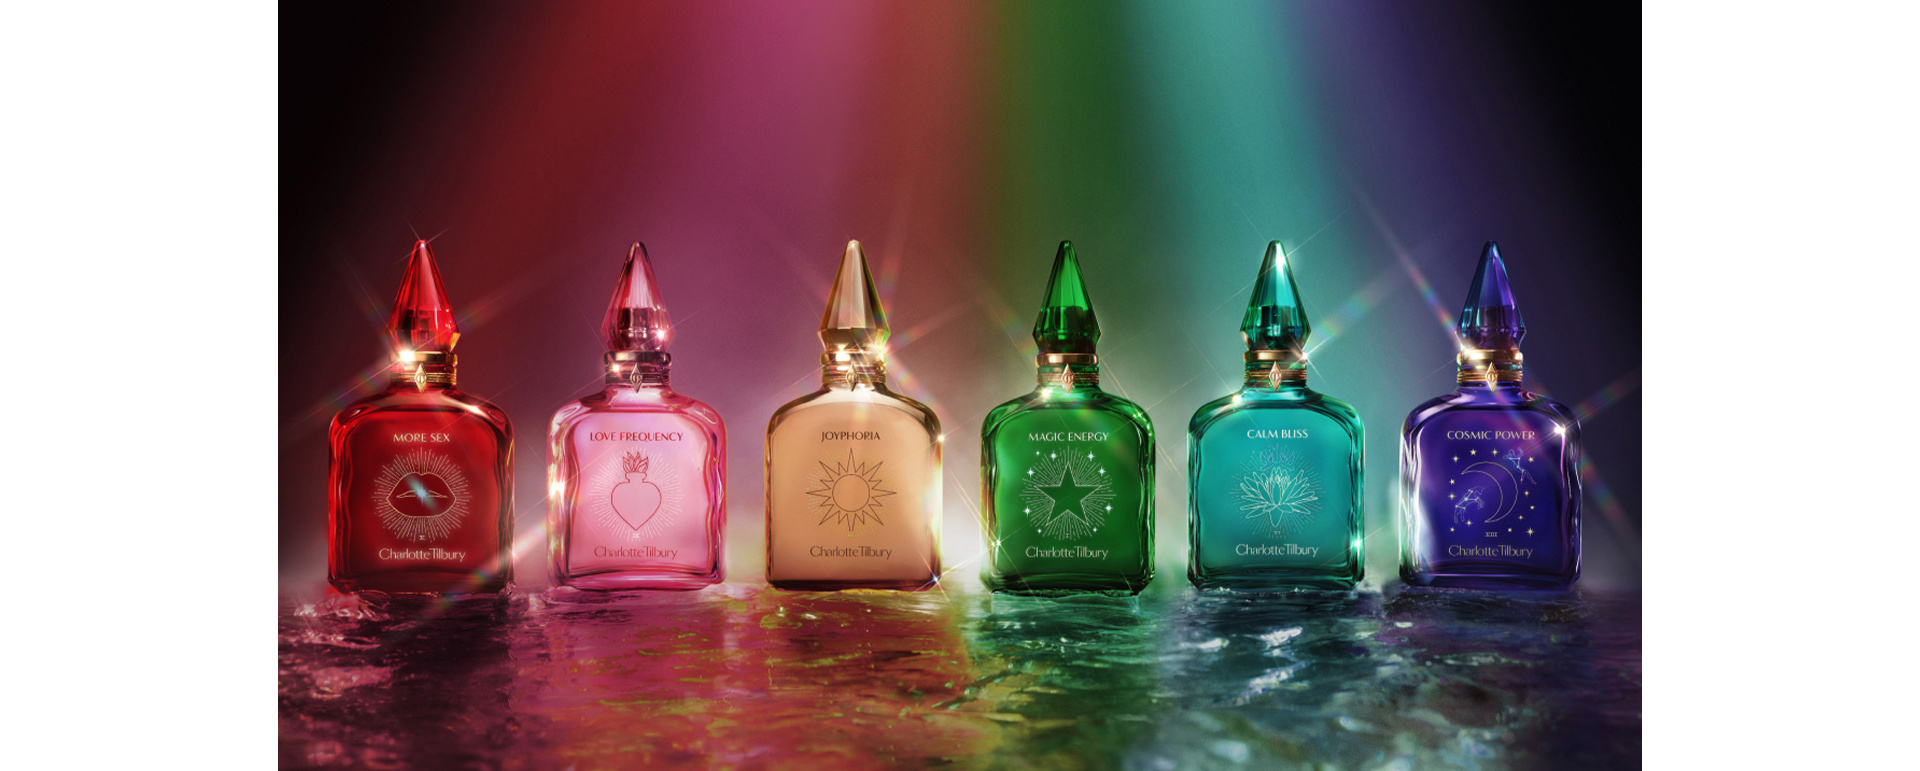 Charlotte's New Fragrance Collection of Emotions